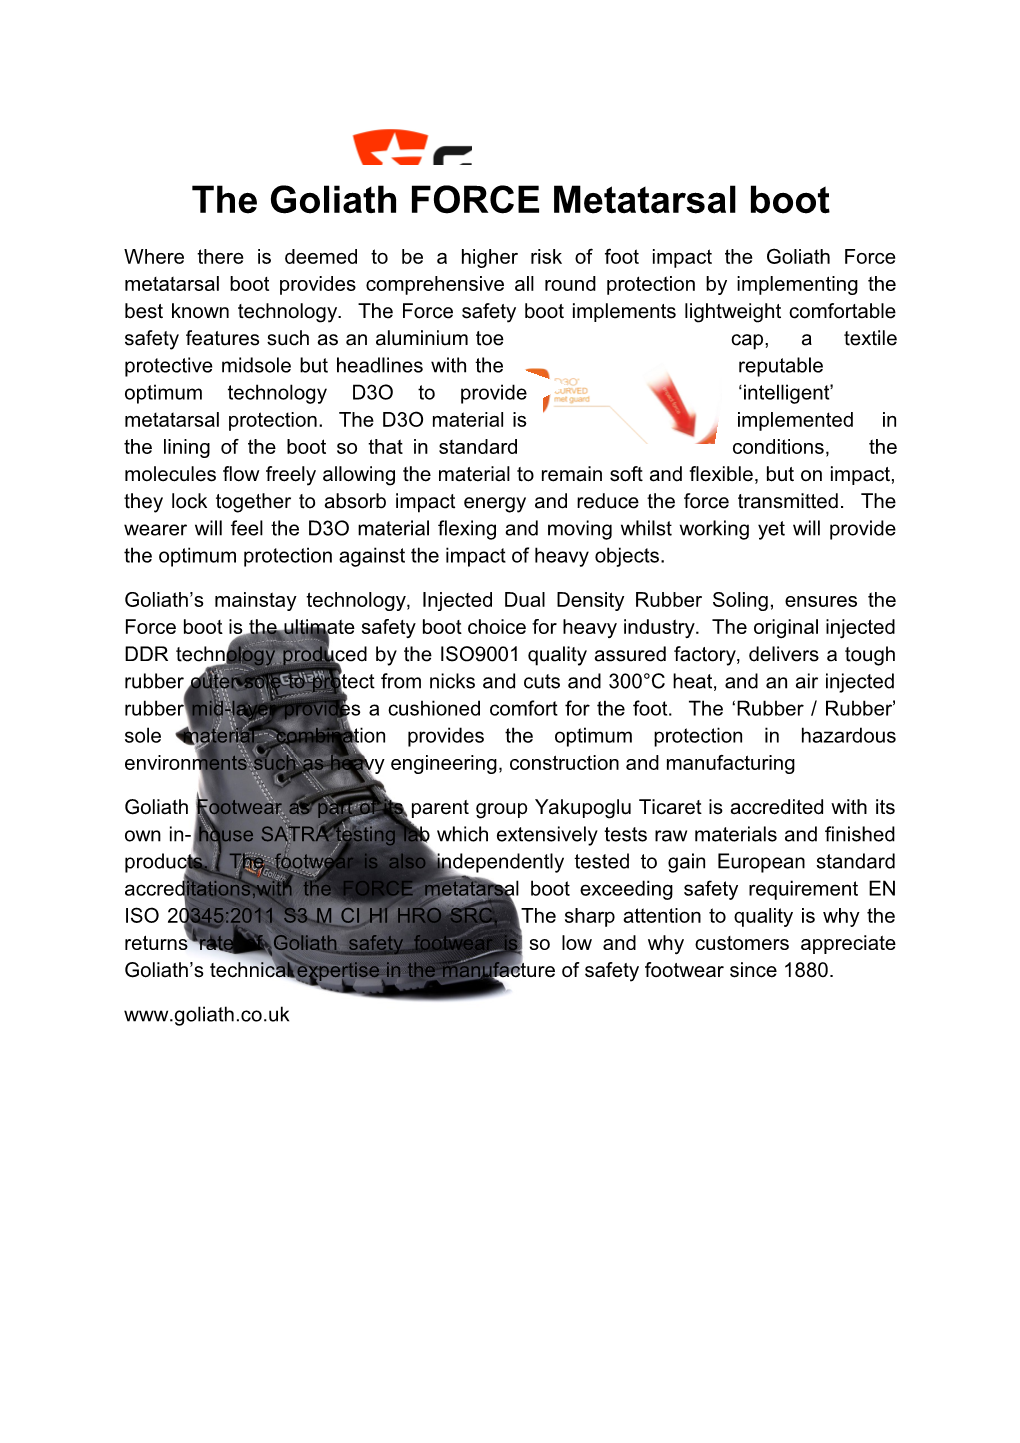 The Goliath FORCE Metatarsal Boot